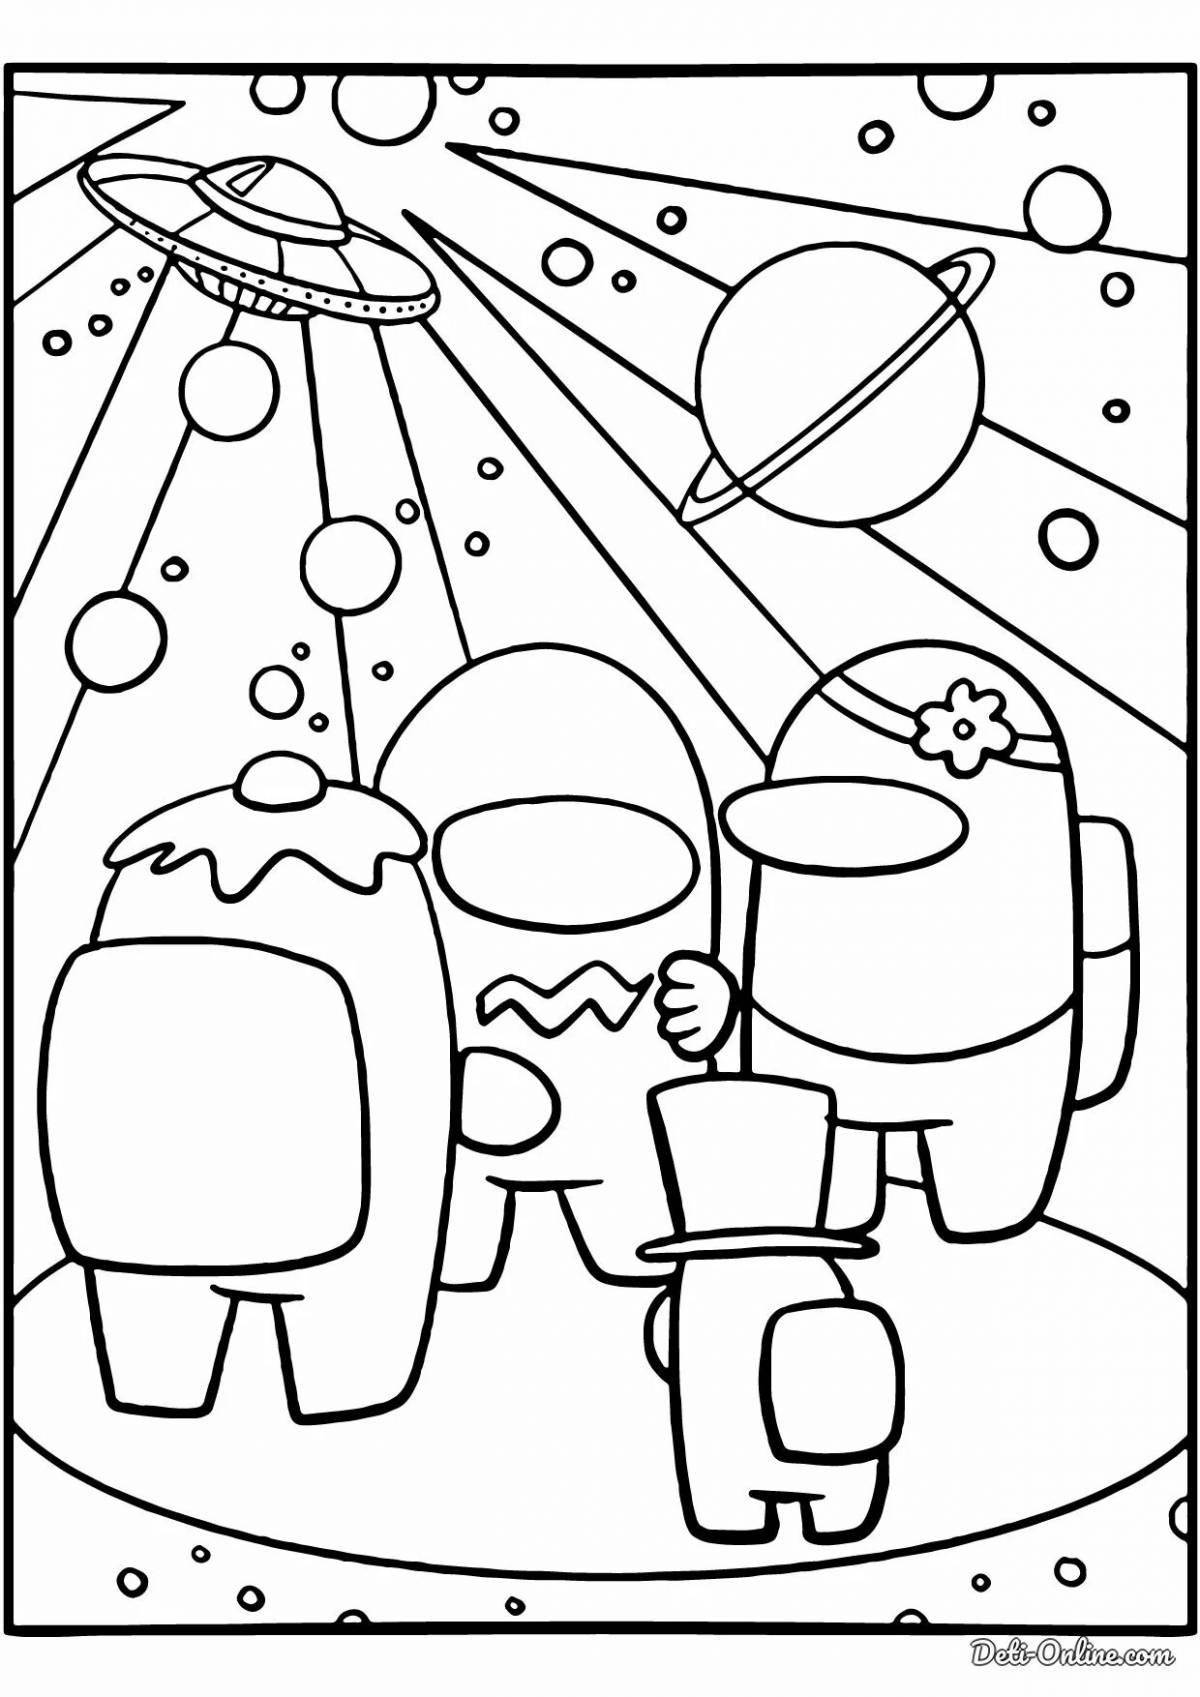 Great space coloring game